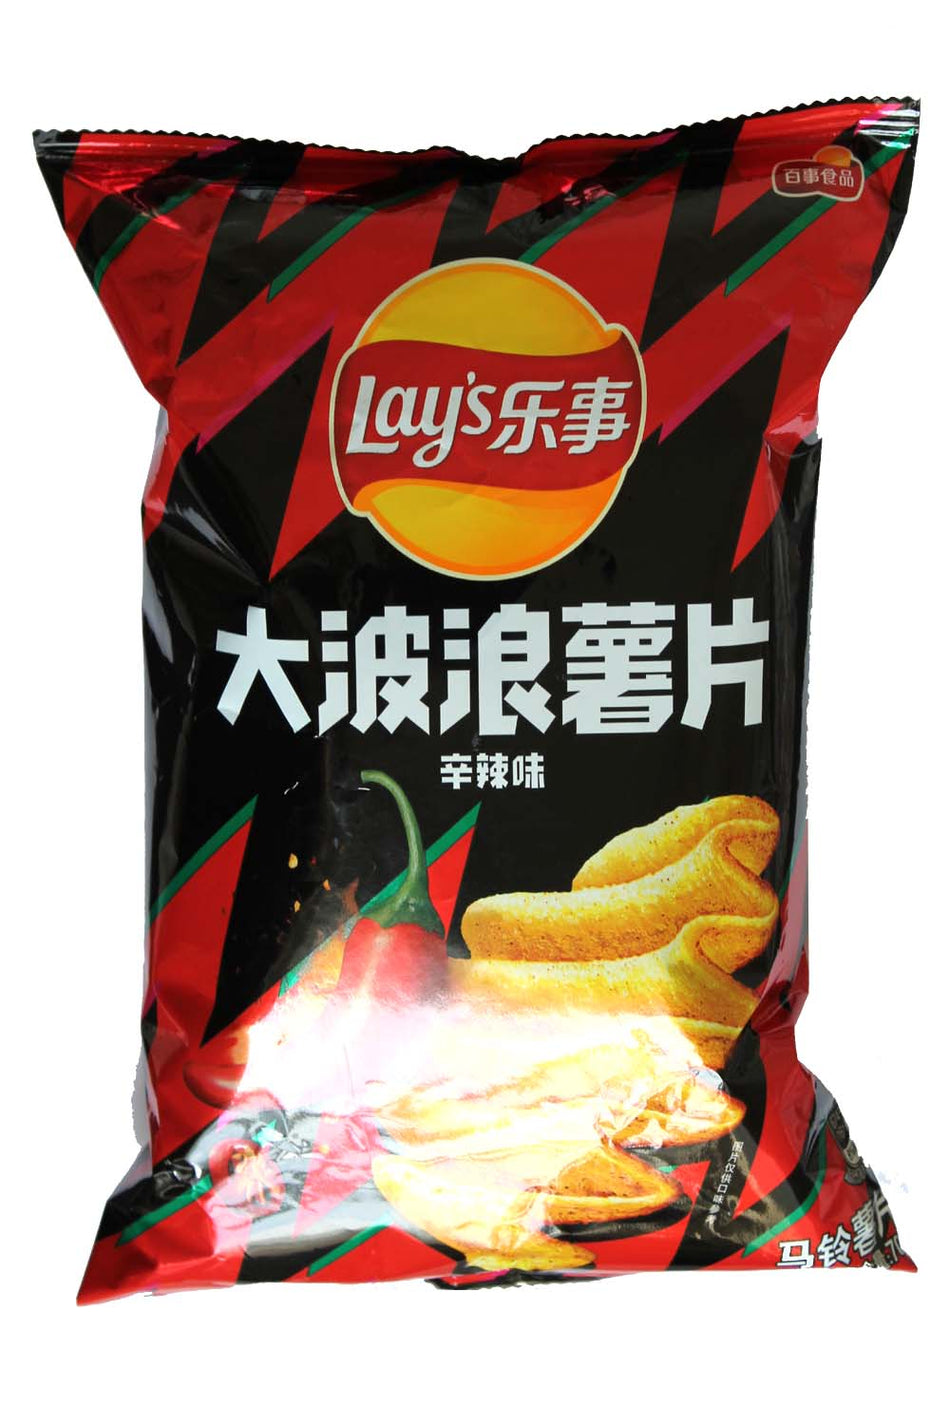 Lay's Pure Spicey flavor chip